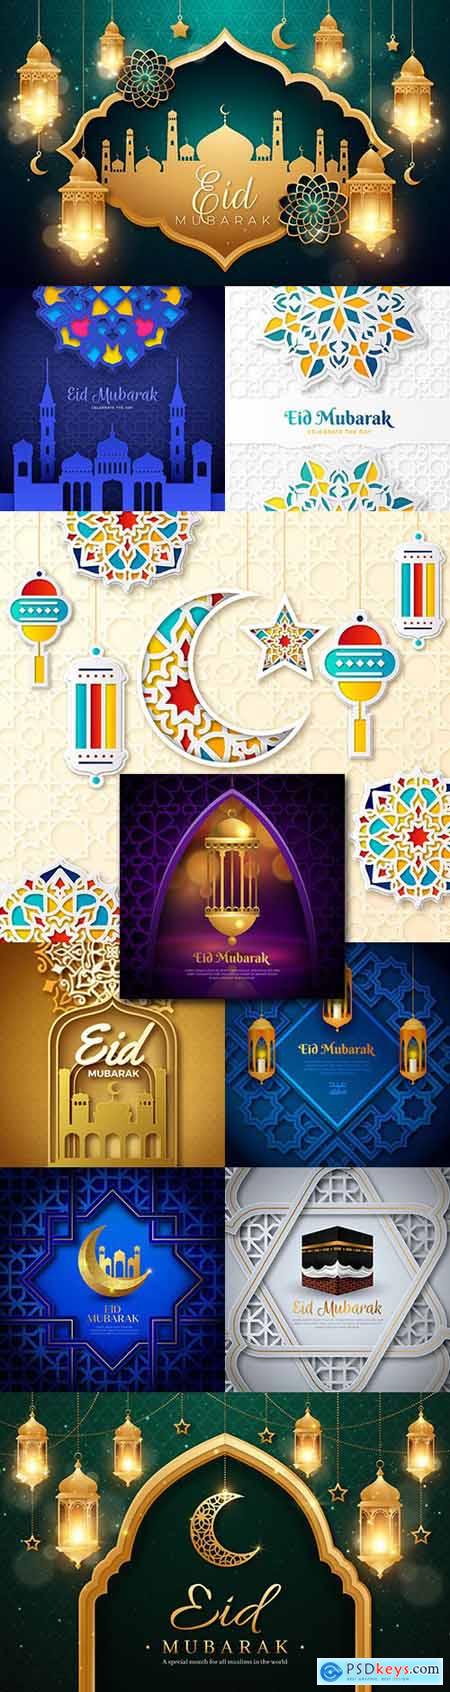 Eid Mubarak pealistic background with candles and mosque